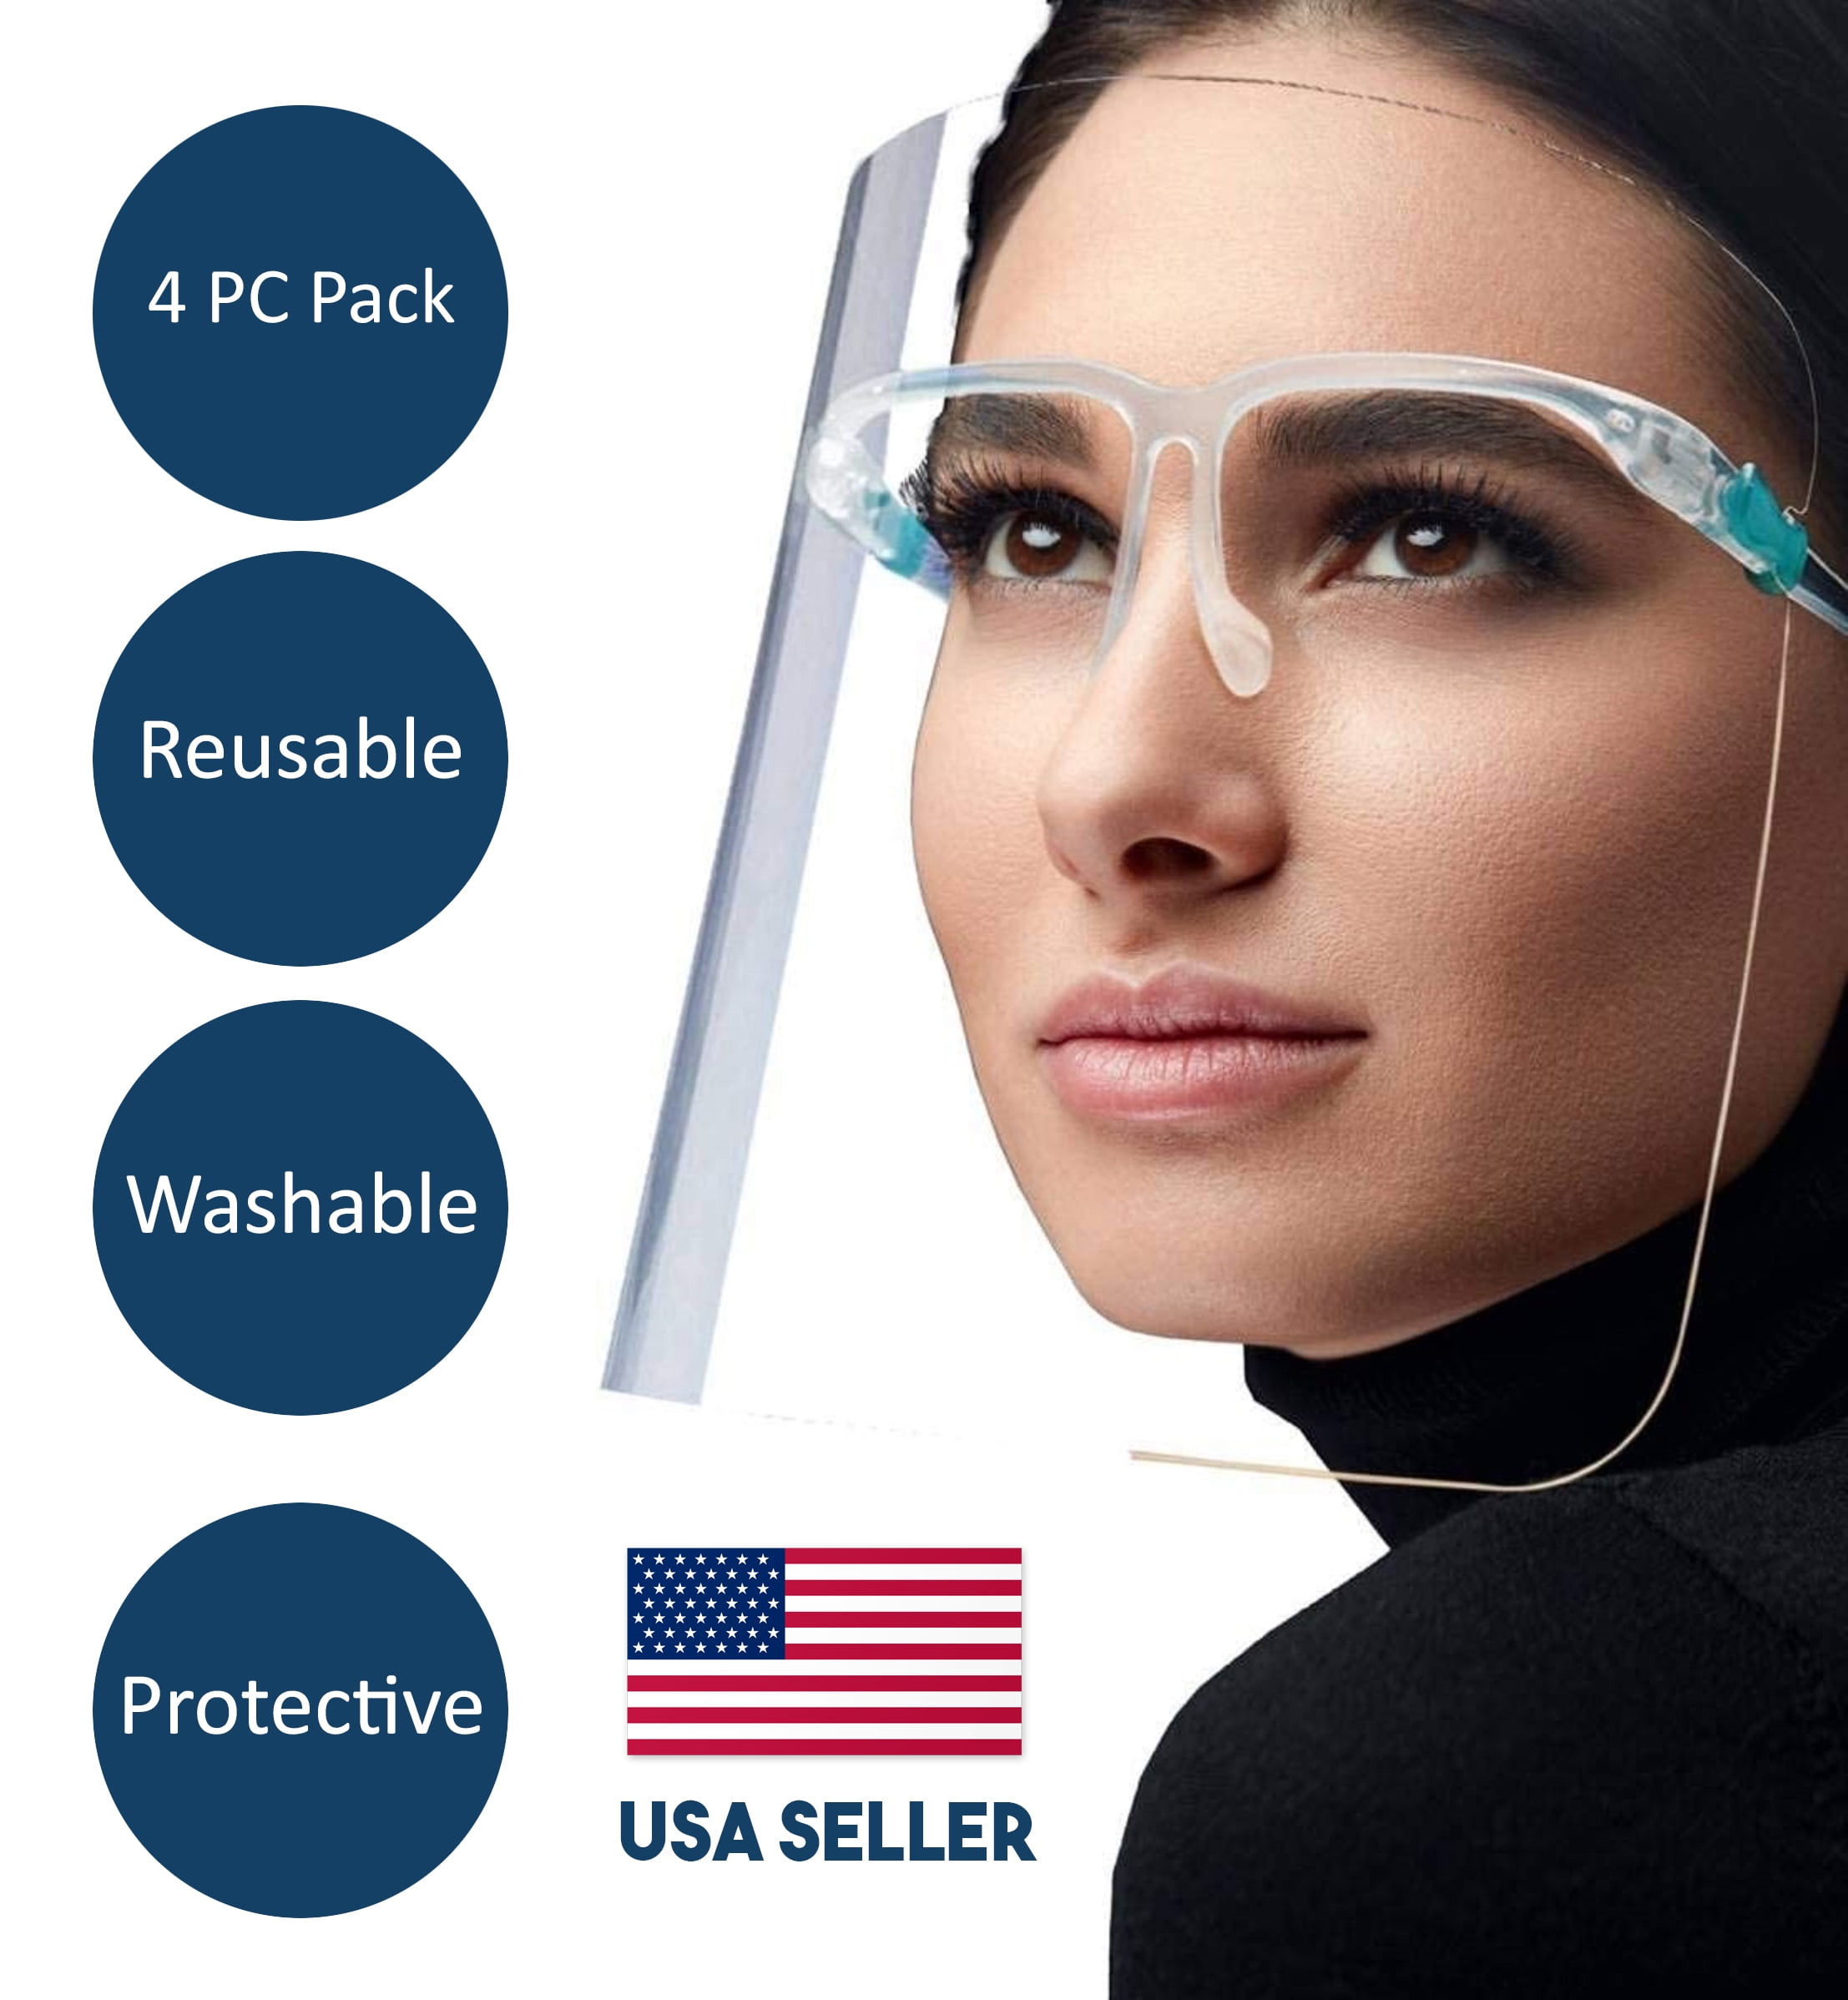 Details about   Unisex Face Shield Protect Visor Cover for Daily Activities & Working AU SELLER 